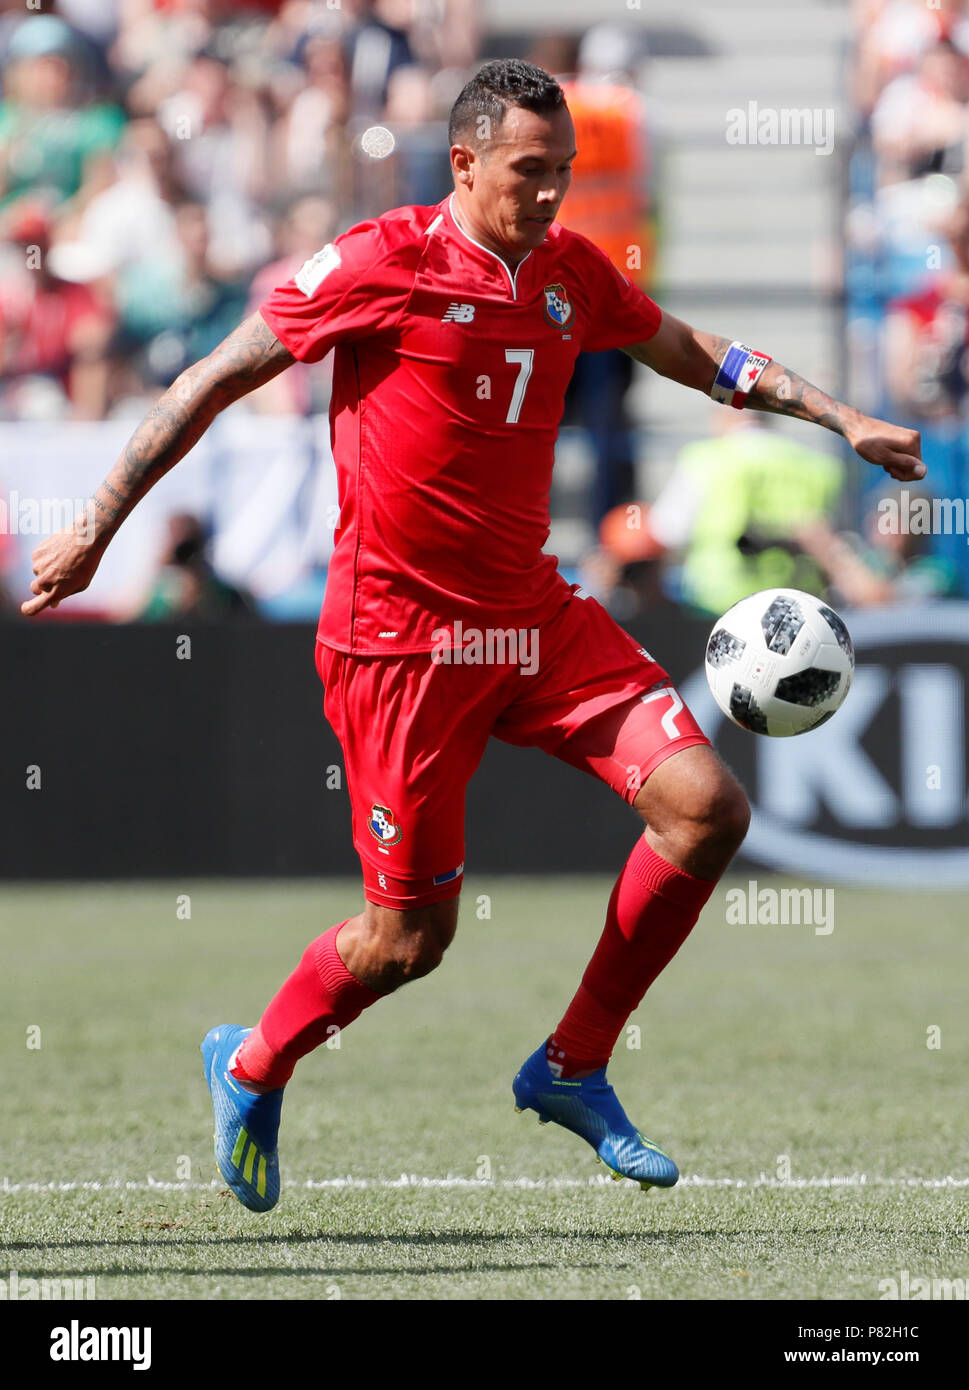 NIZHNY NOVGOROD, RUSSIA - JUNE 24: Blas Perez of Panama national team during the 2018 FIFA World Cup Russia group G match between England and Panama at Nizhny Novgorod Stadium on June 24, 2018 in Nizhny Novgorod, Russia. (MB Media) Stock Photo